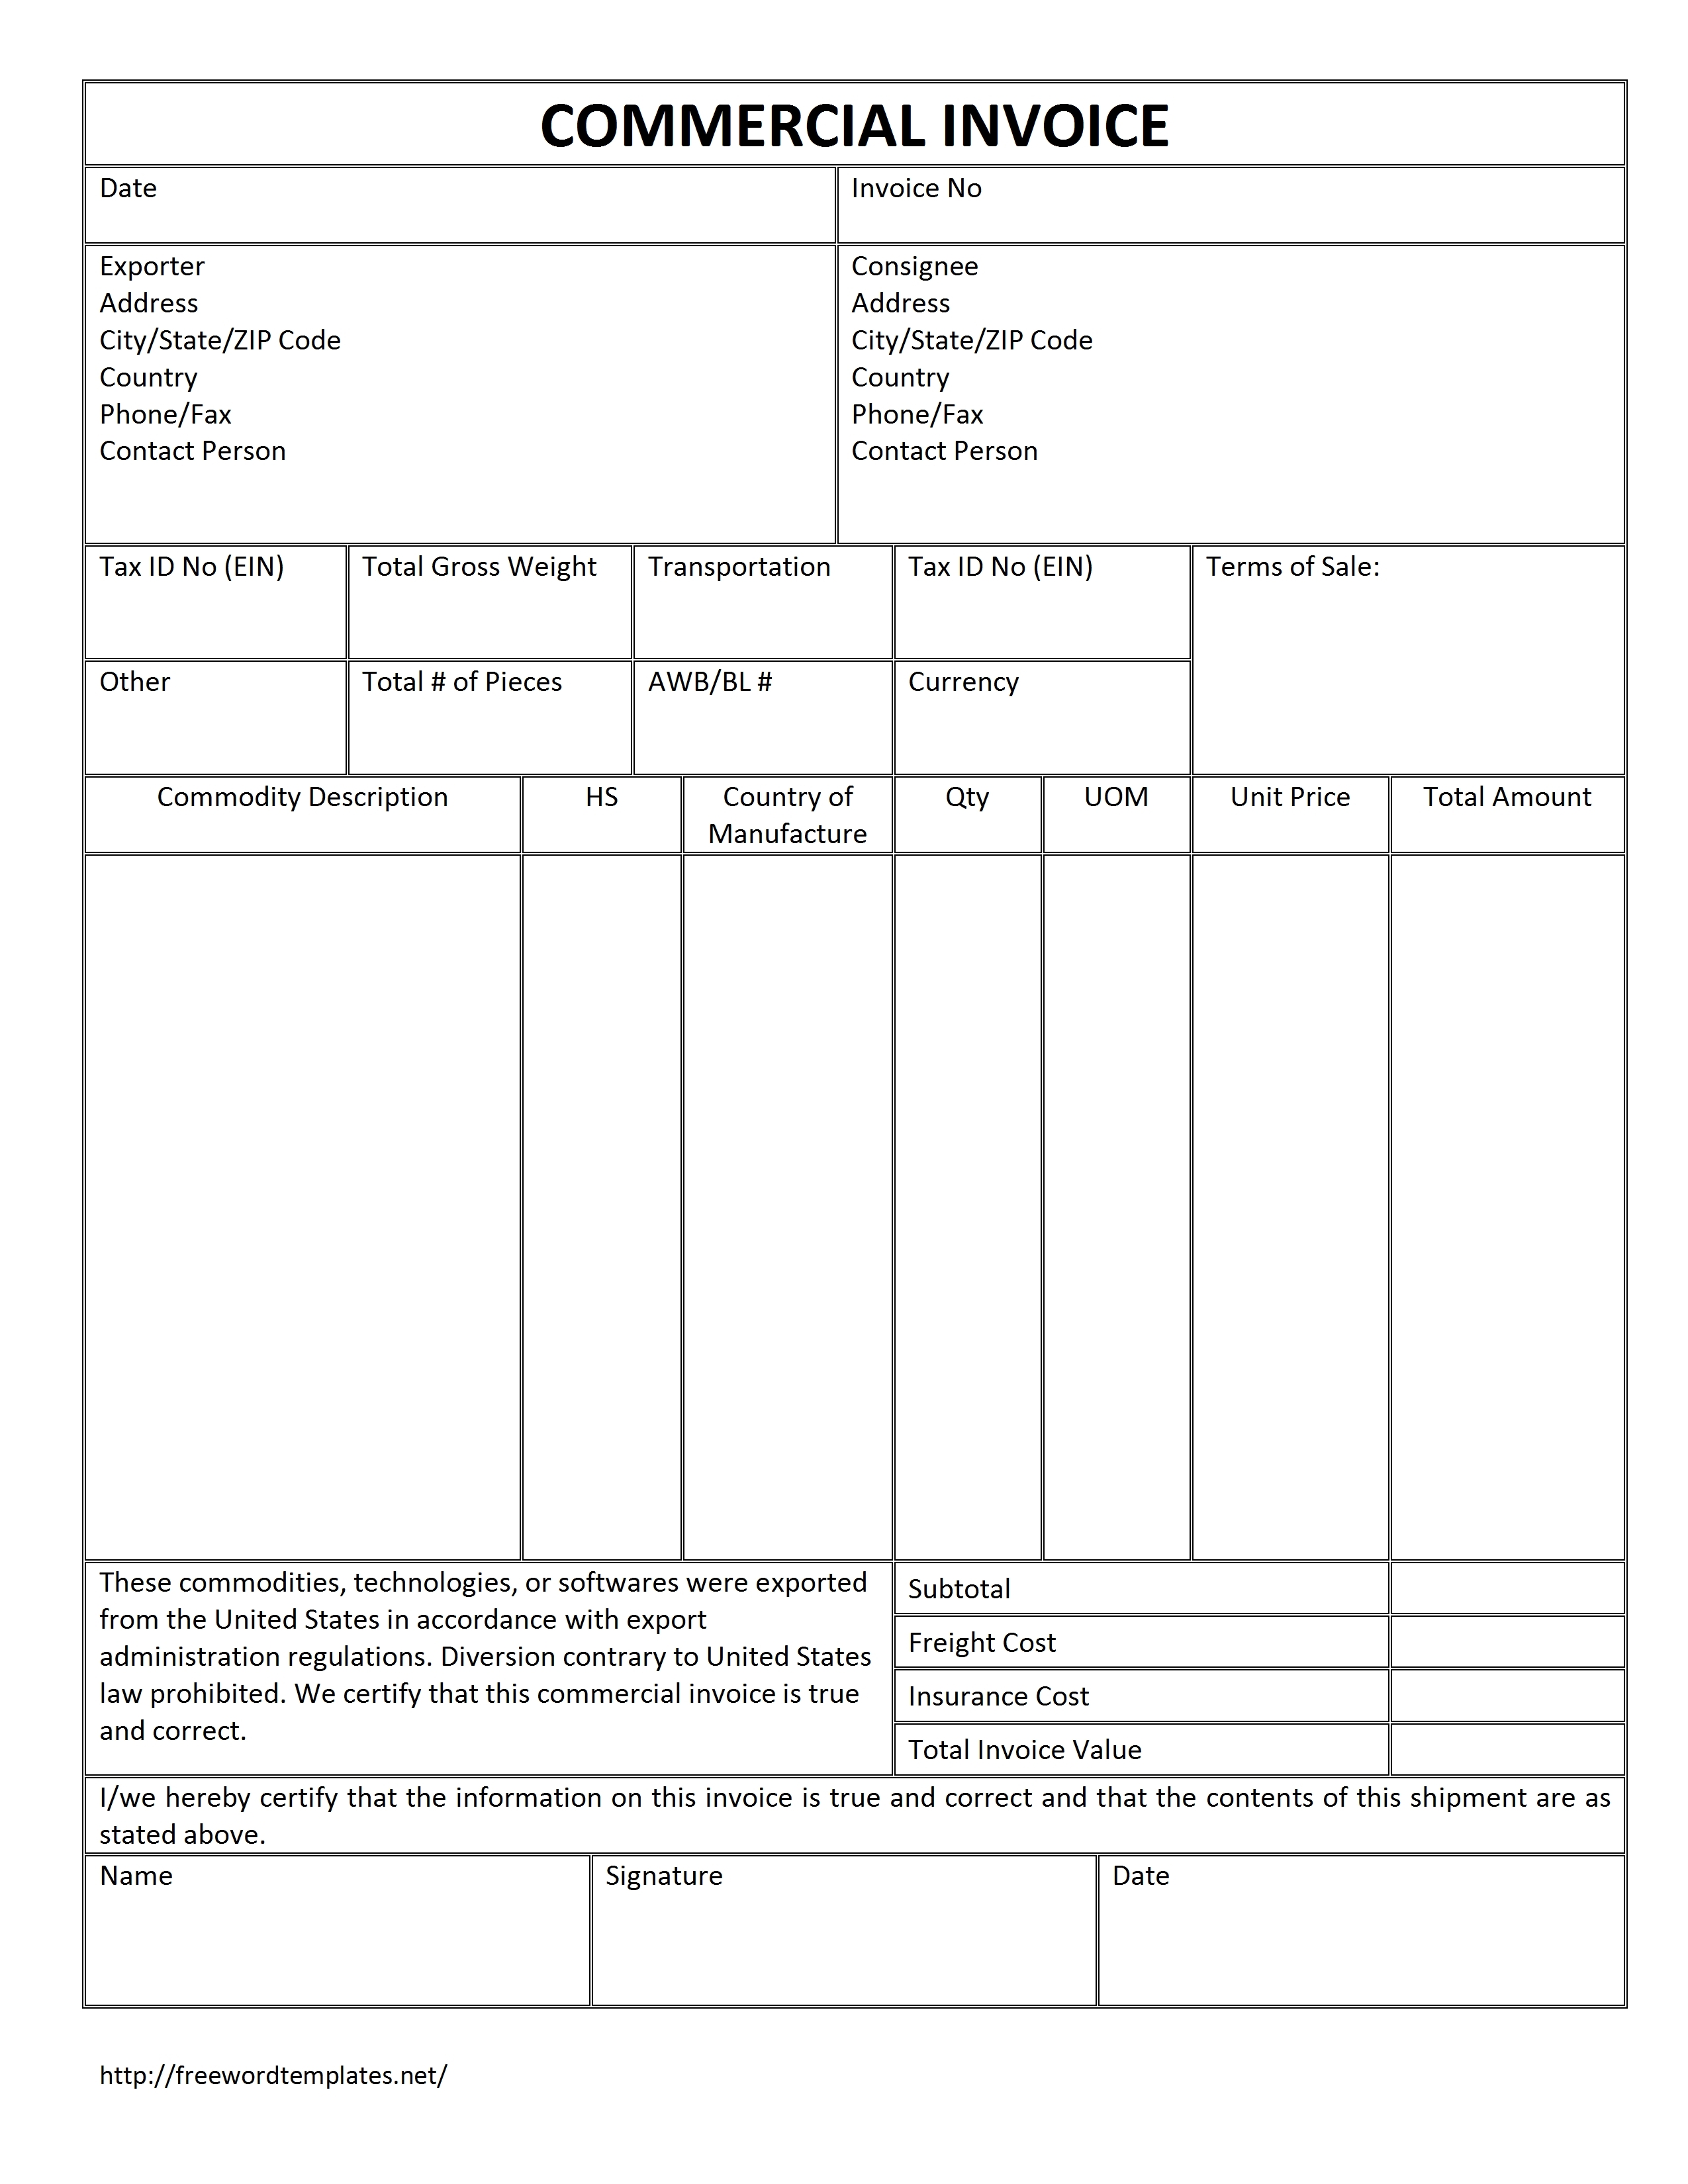 commercial invoice template ossummit printable commercial invoice